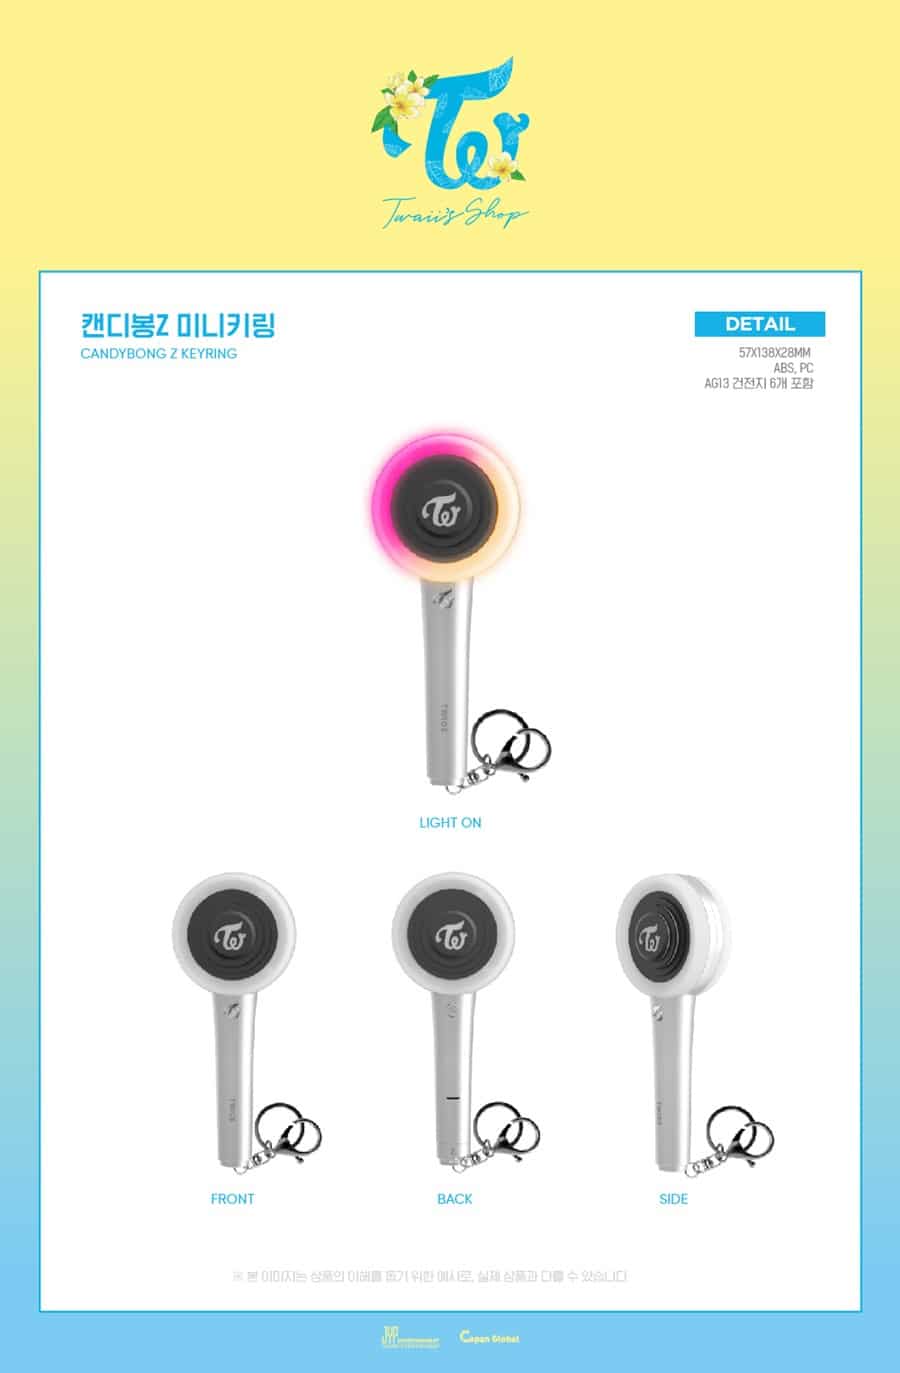 TWICE Official Candy-Bong Z Keyring